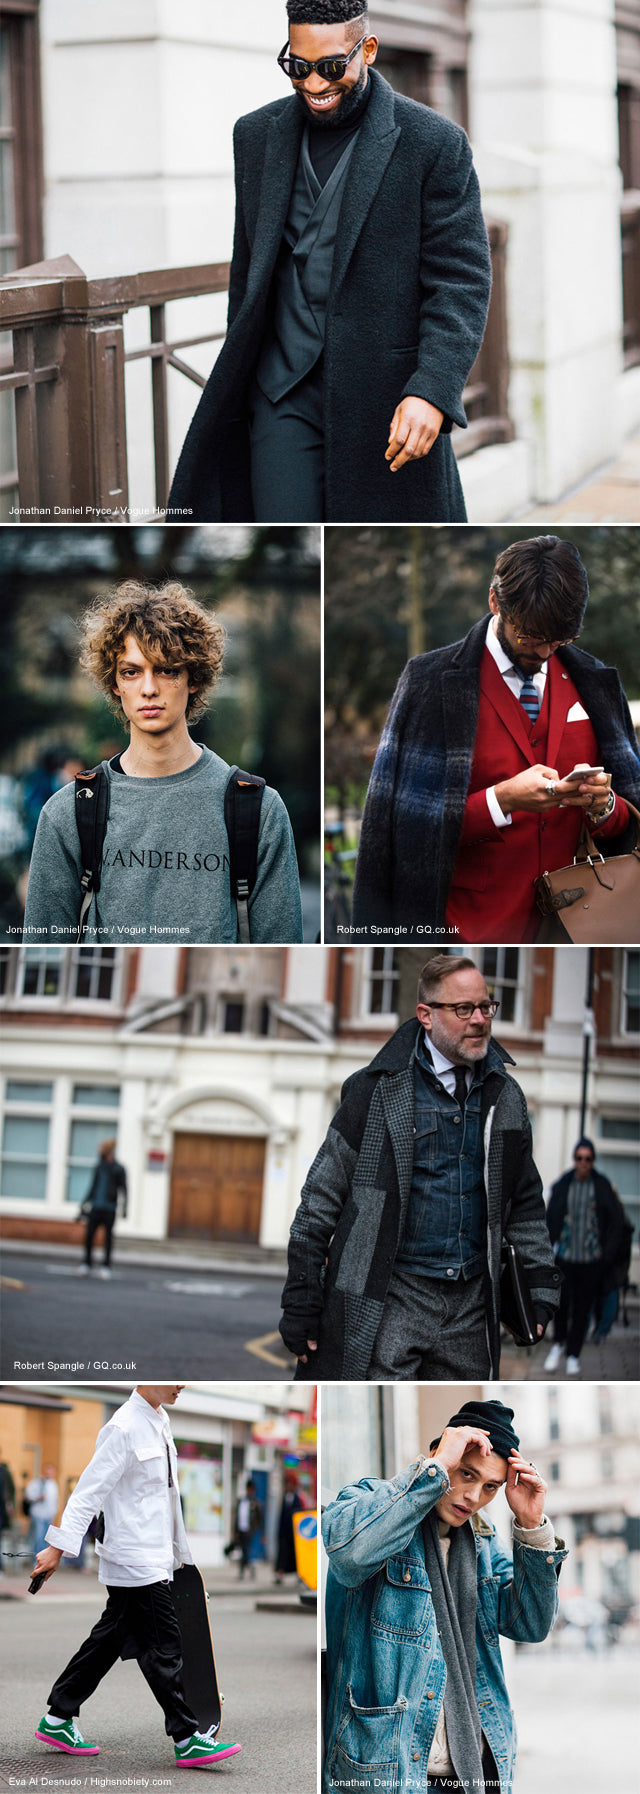 Our Favourite Street Style Looks From London Collections Men Autumn/Winter 2016